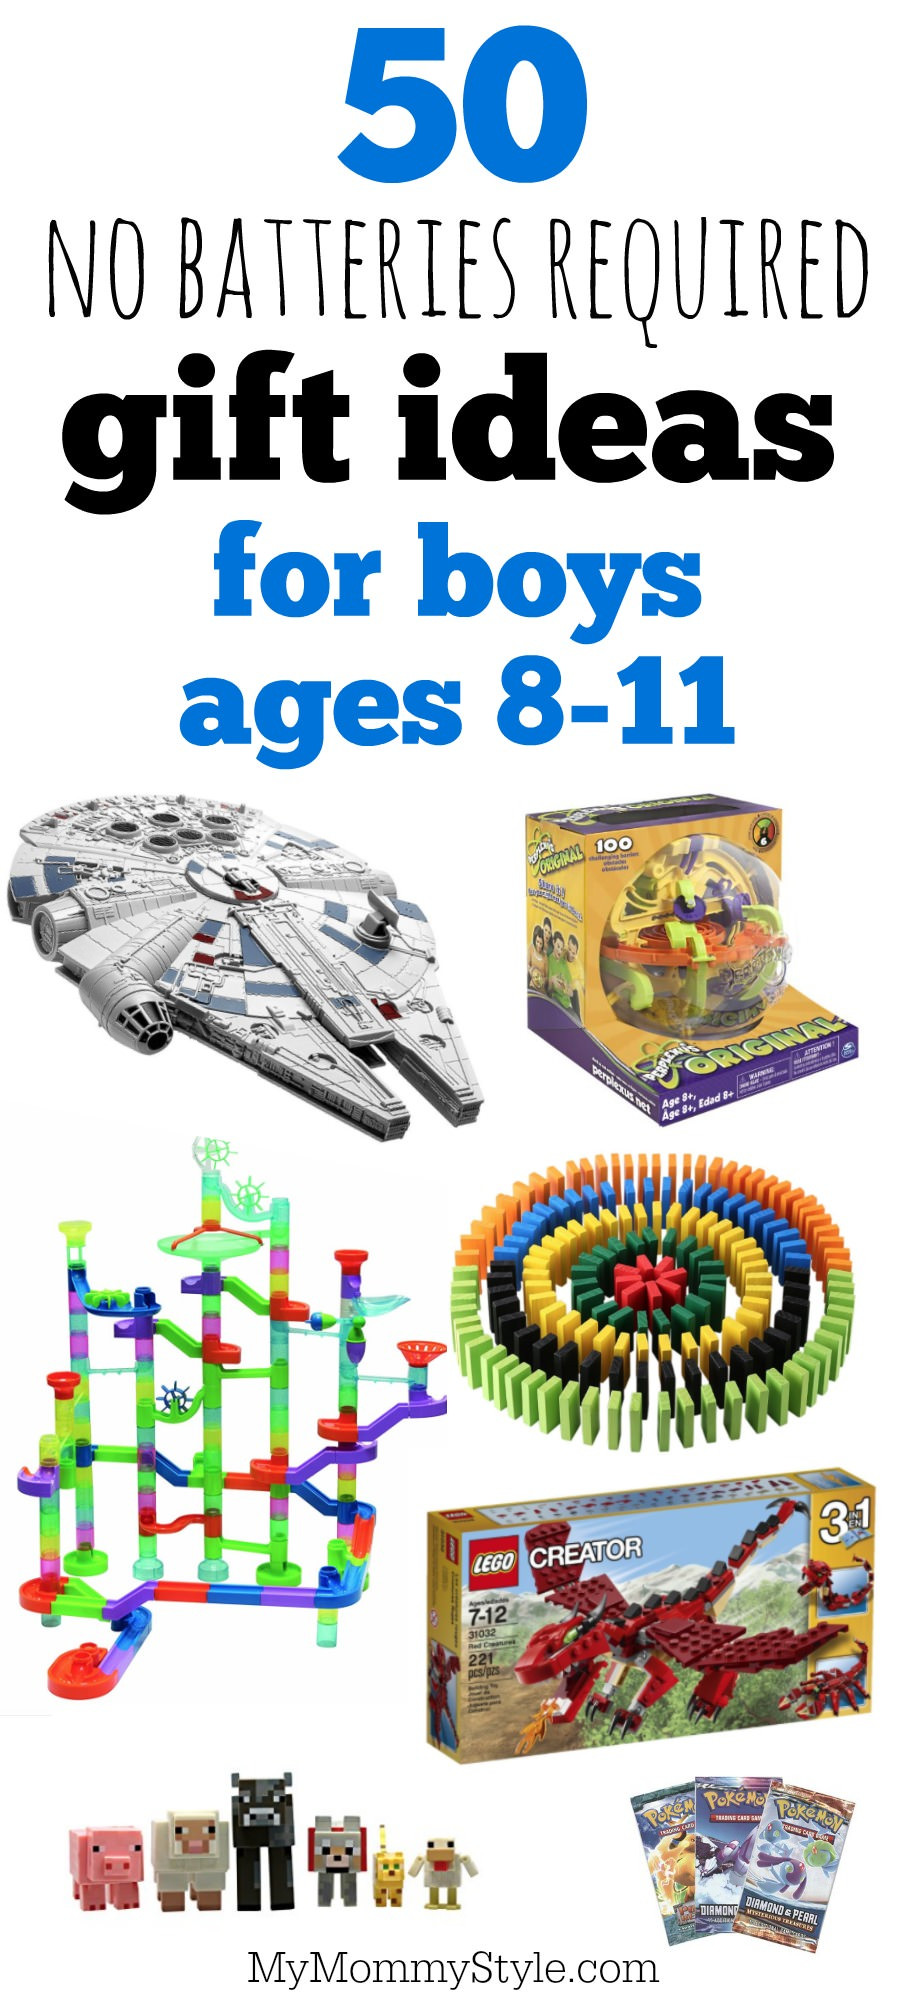 Gift Ideas For Boys Age 8
 50 battery free t ideas for boys ages 8 11 My Mommy Style